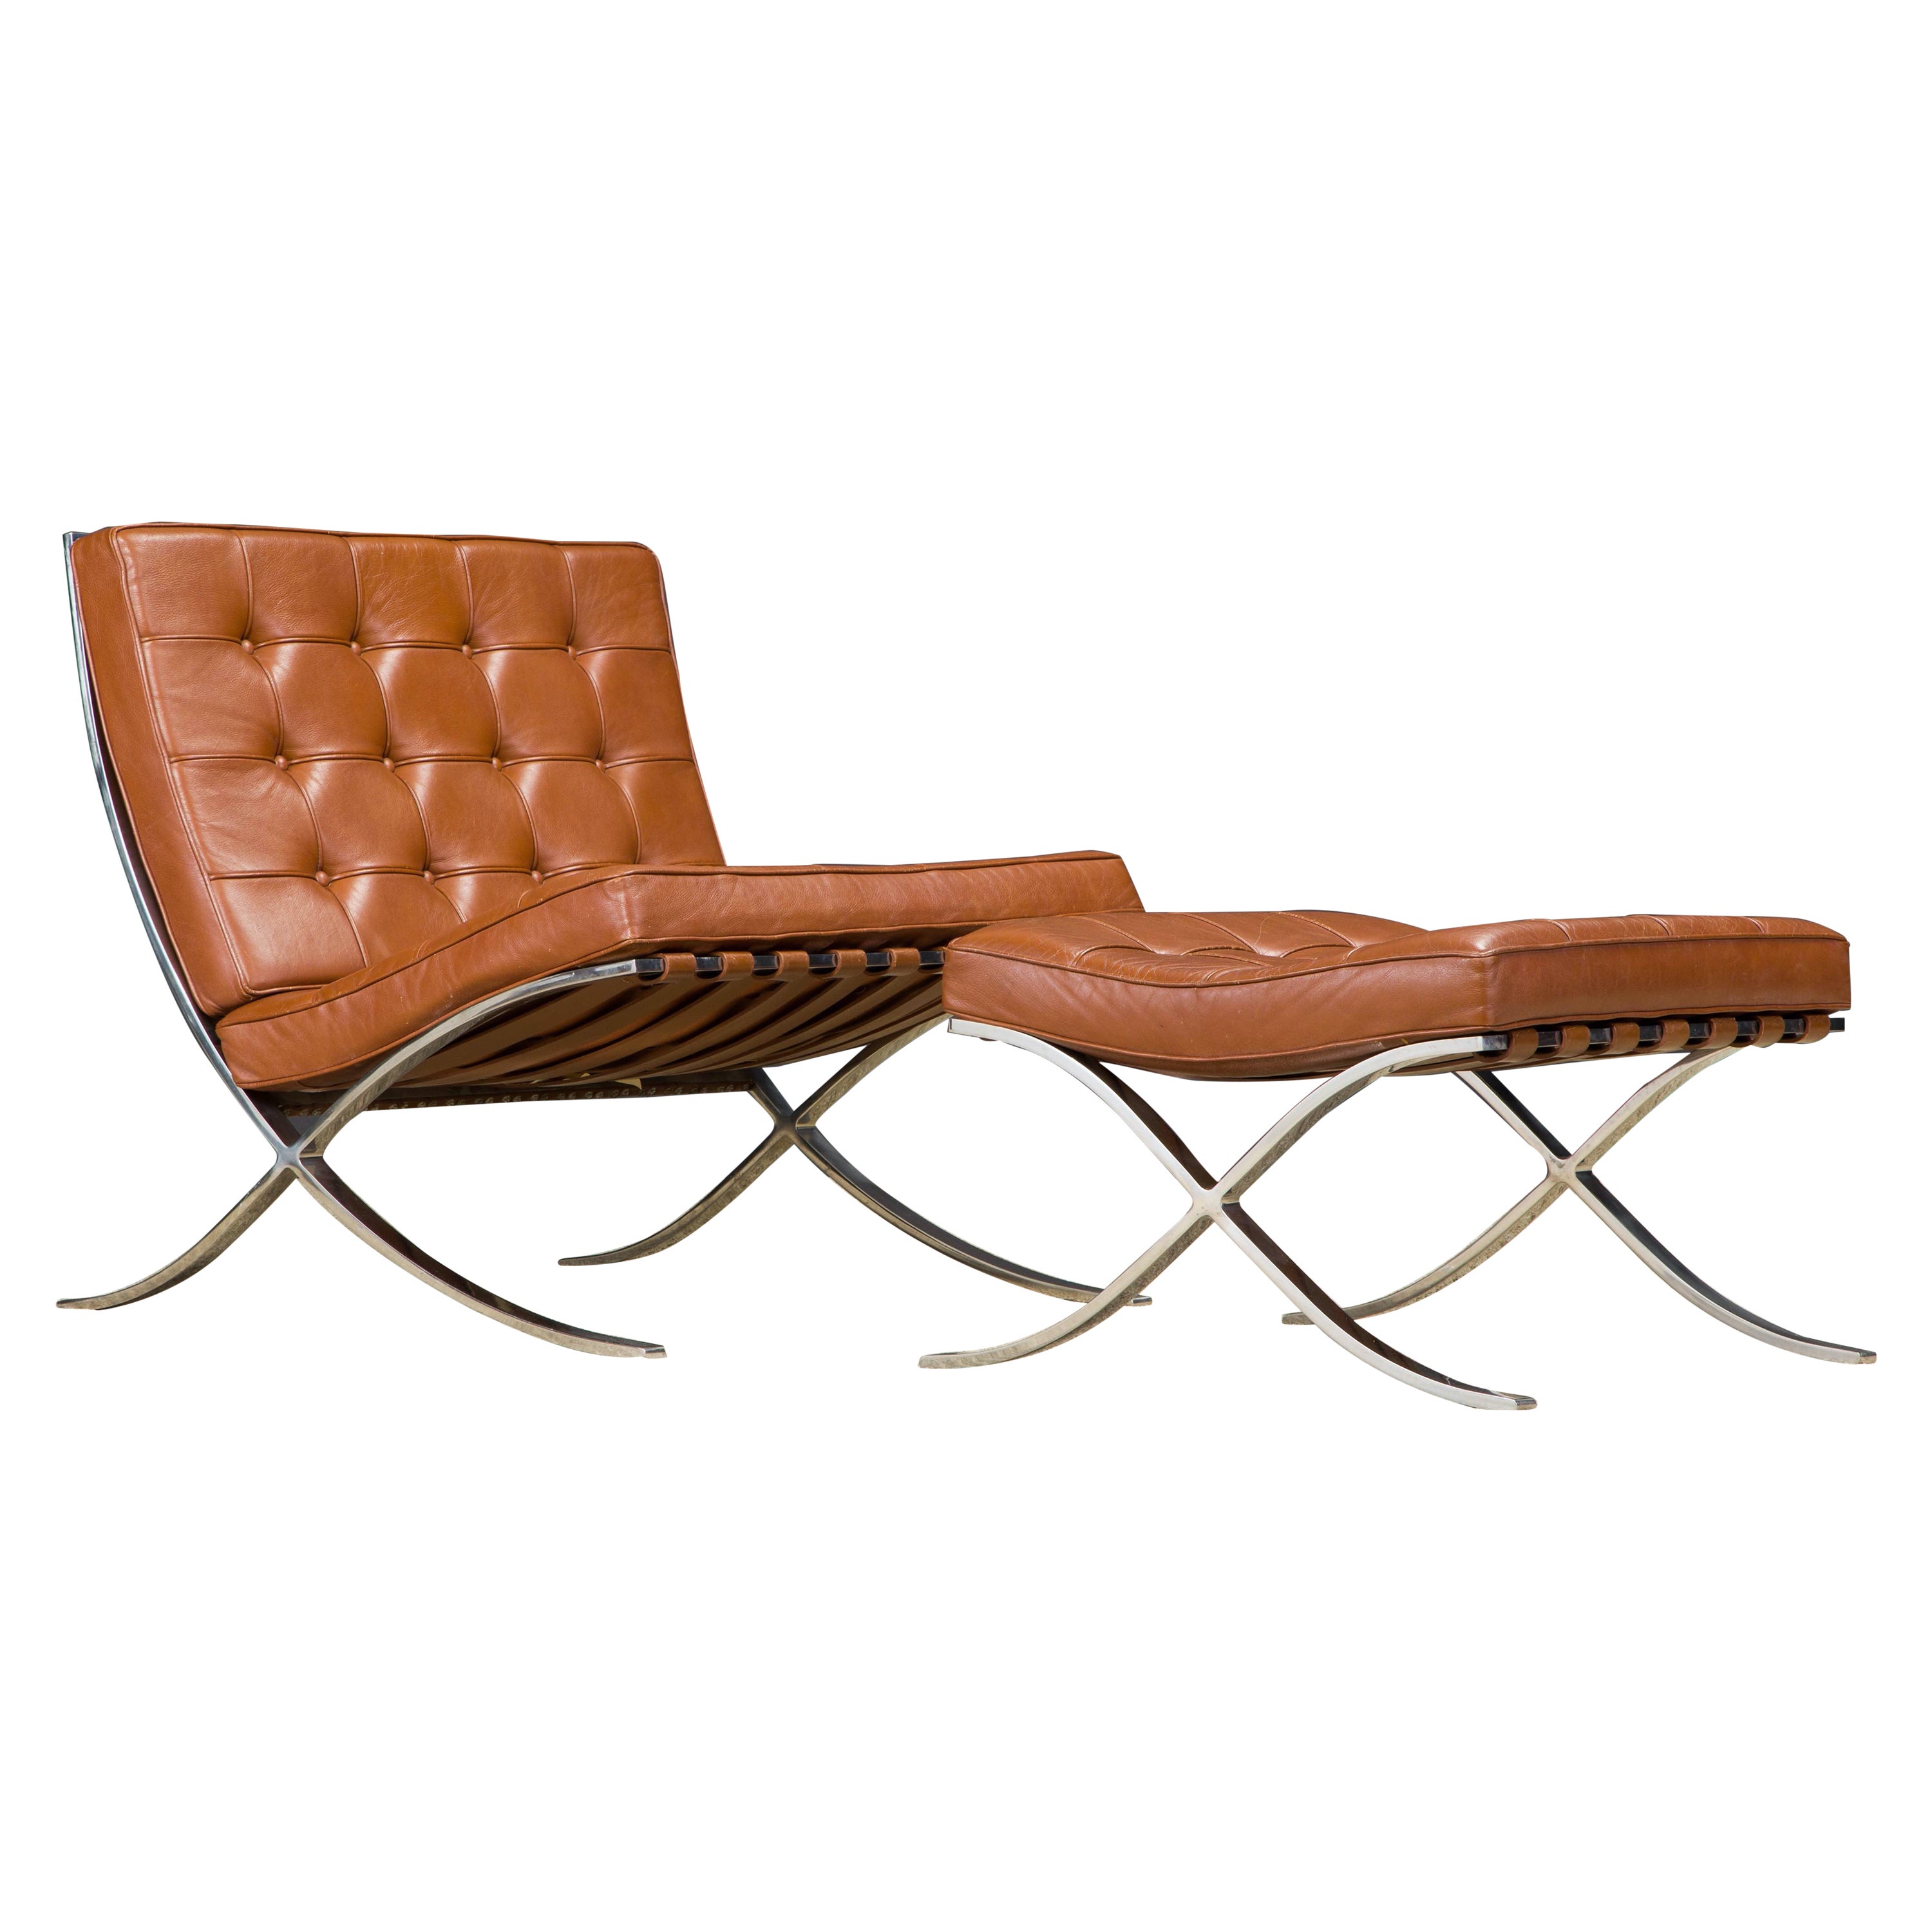 1st-Gen Knoll Barcelona Lounge Set by Mies Van Der Rohe, c. 1968, Double-Signed